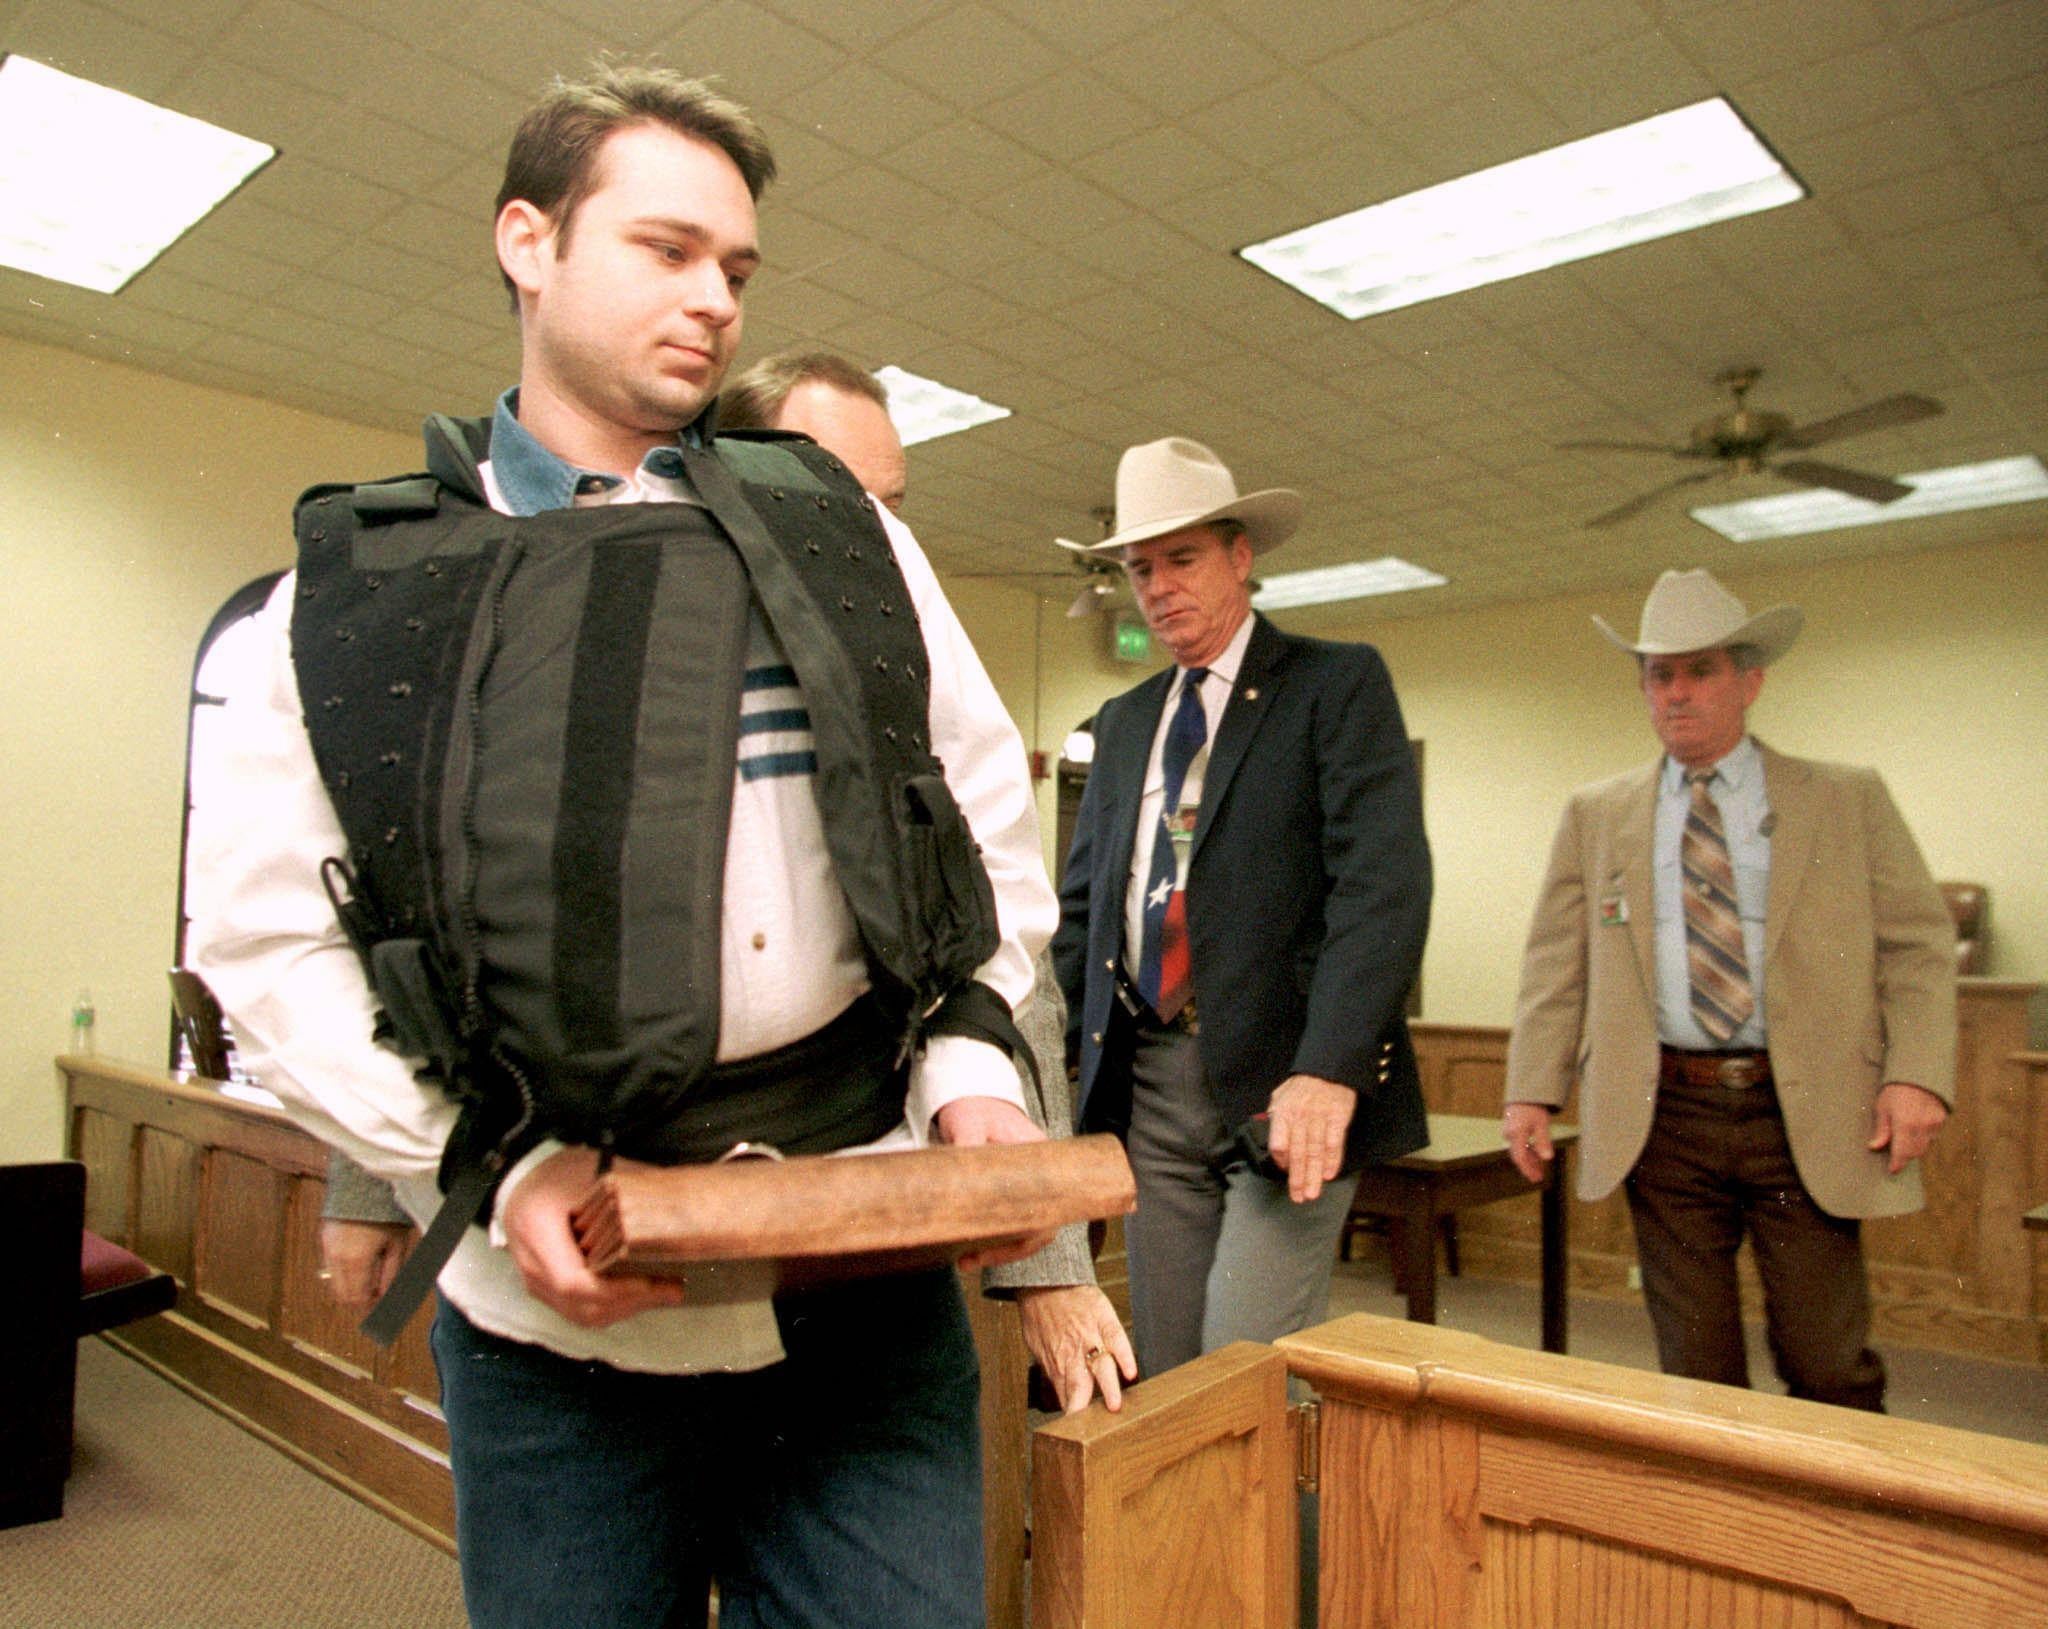 John William King Executed By Injection In Connection To The Dragging Death Of James Byrd Jr.